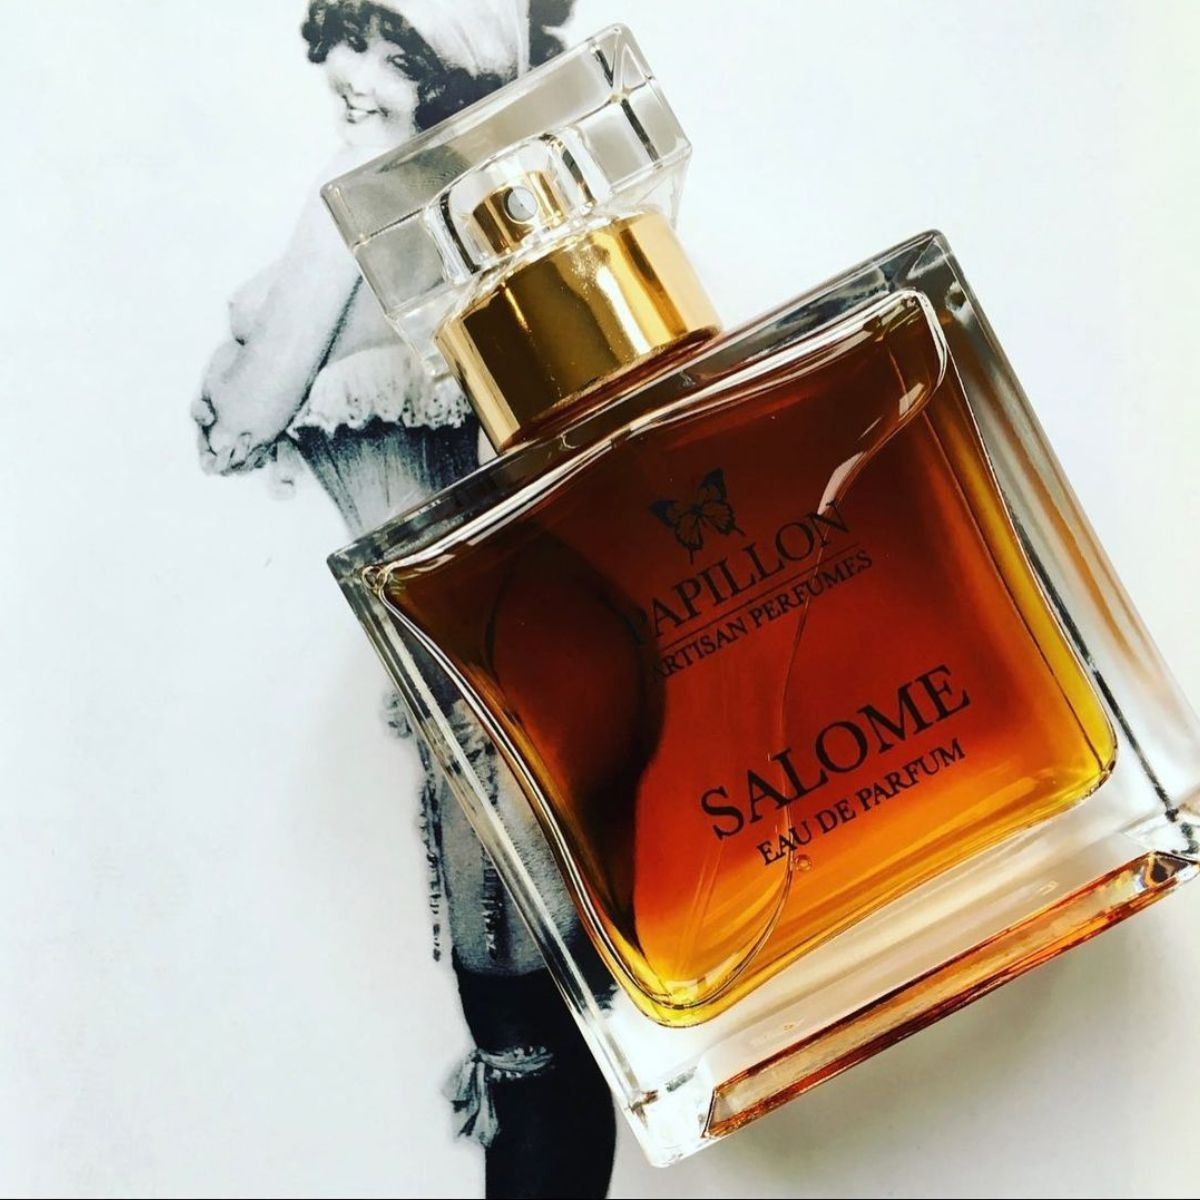 Image of the perfume Salome by the brand Papillon